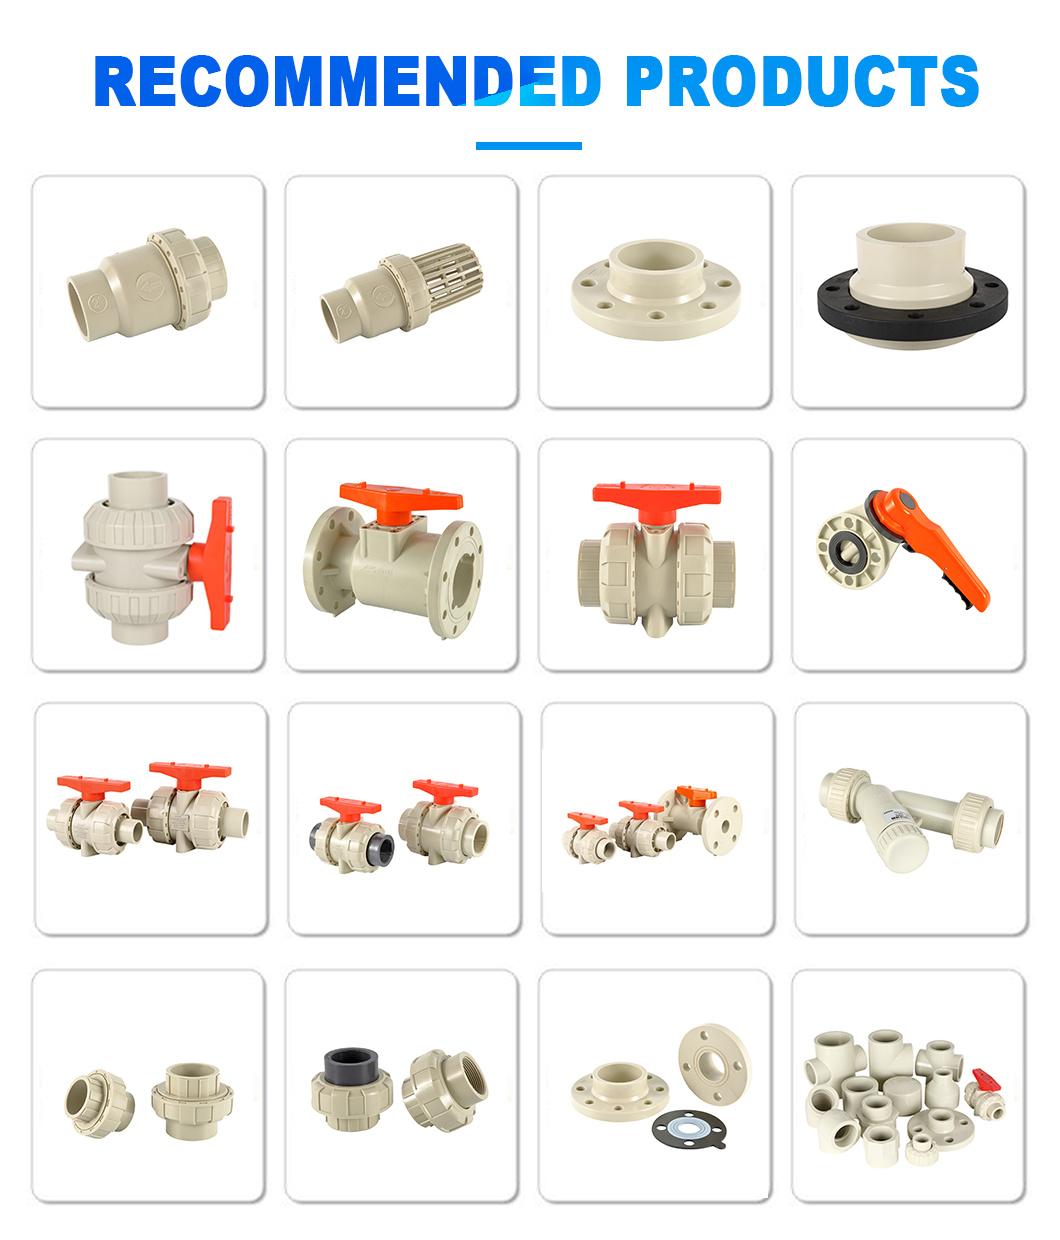 High Quality Pphts Flange Pipe Fittings Plastic Welding Imported Raw Materials